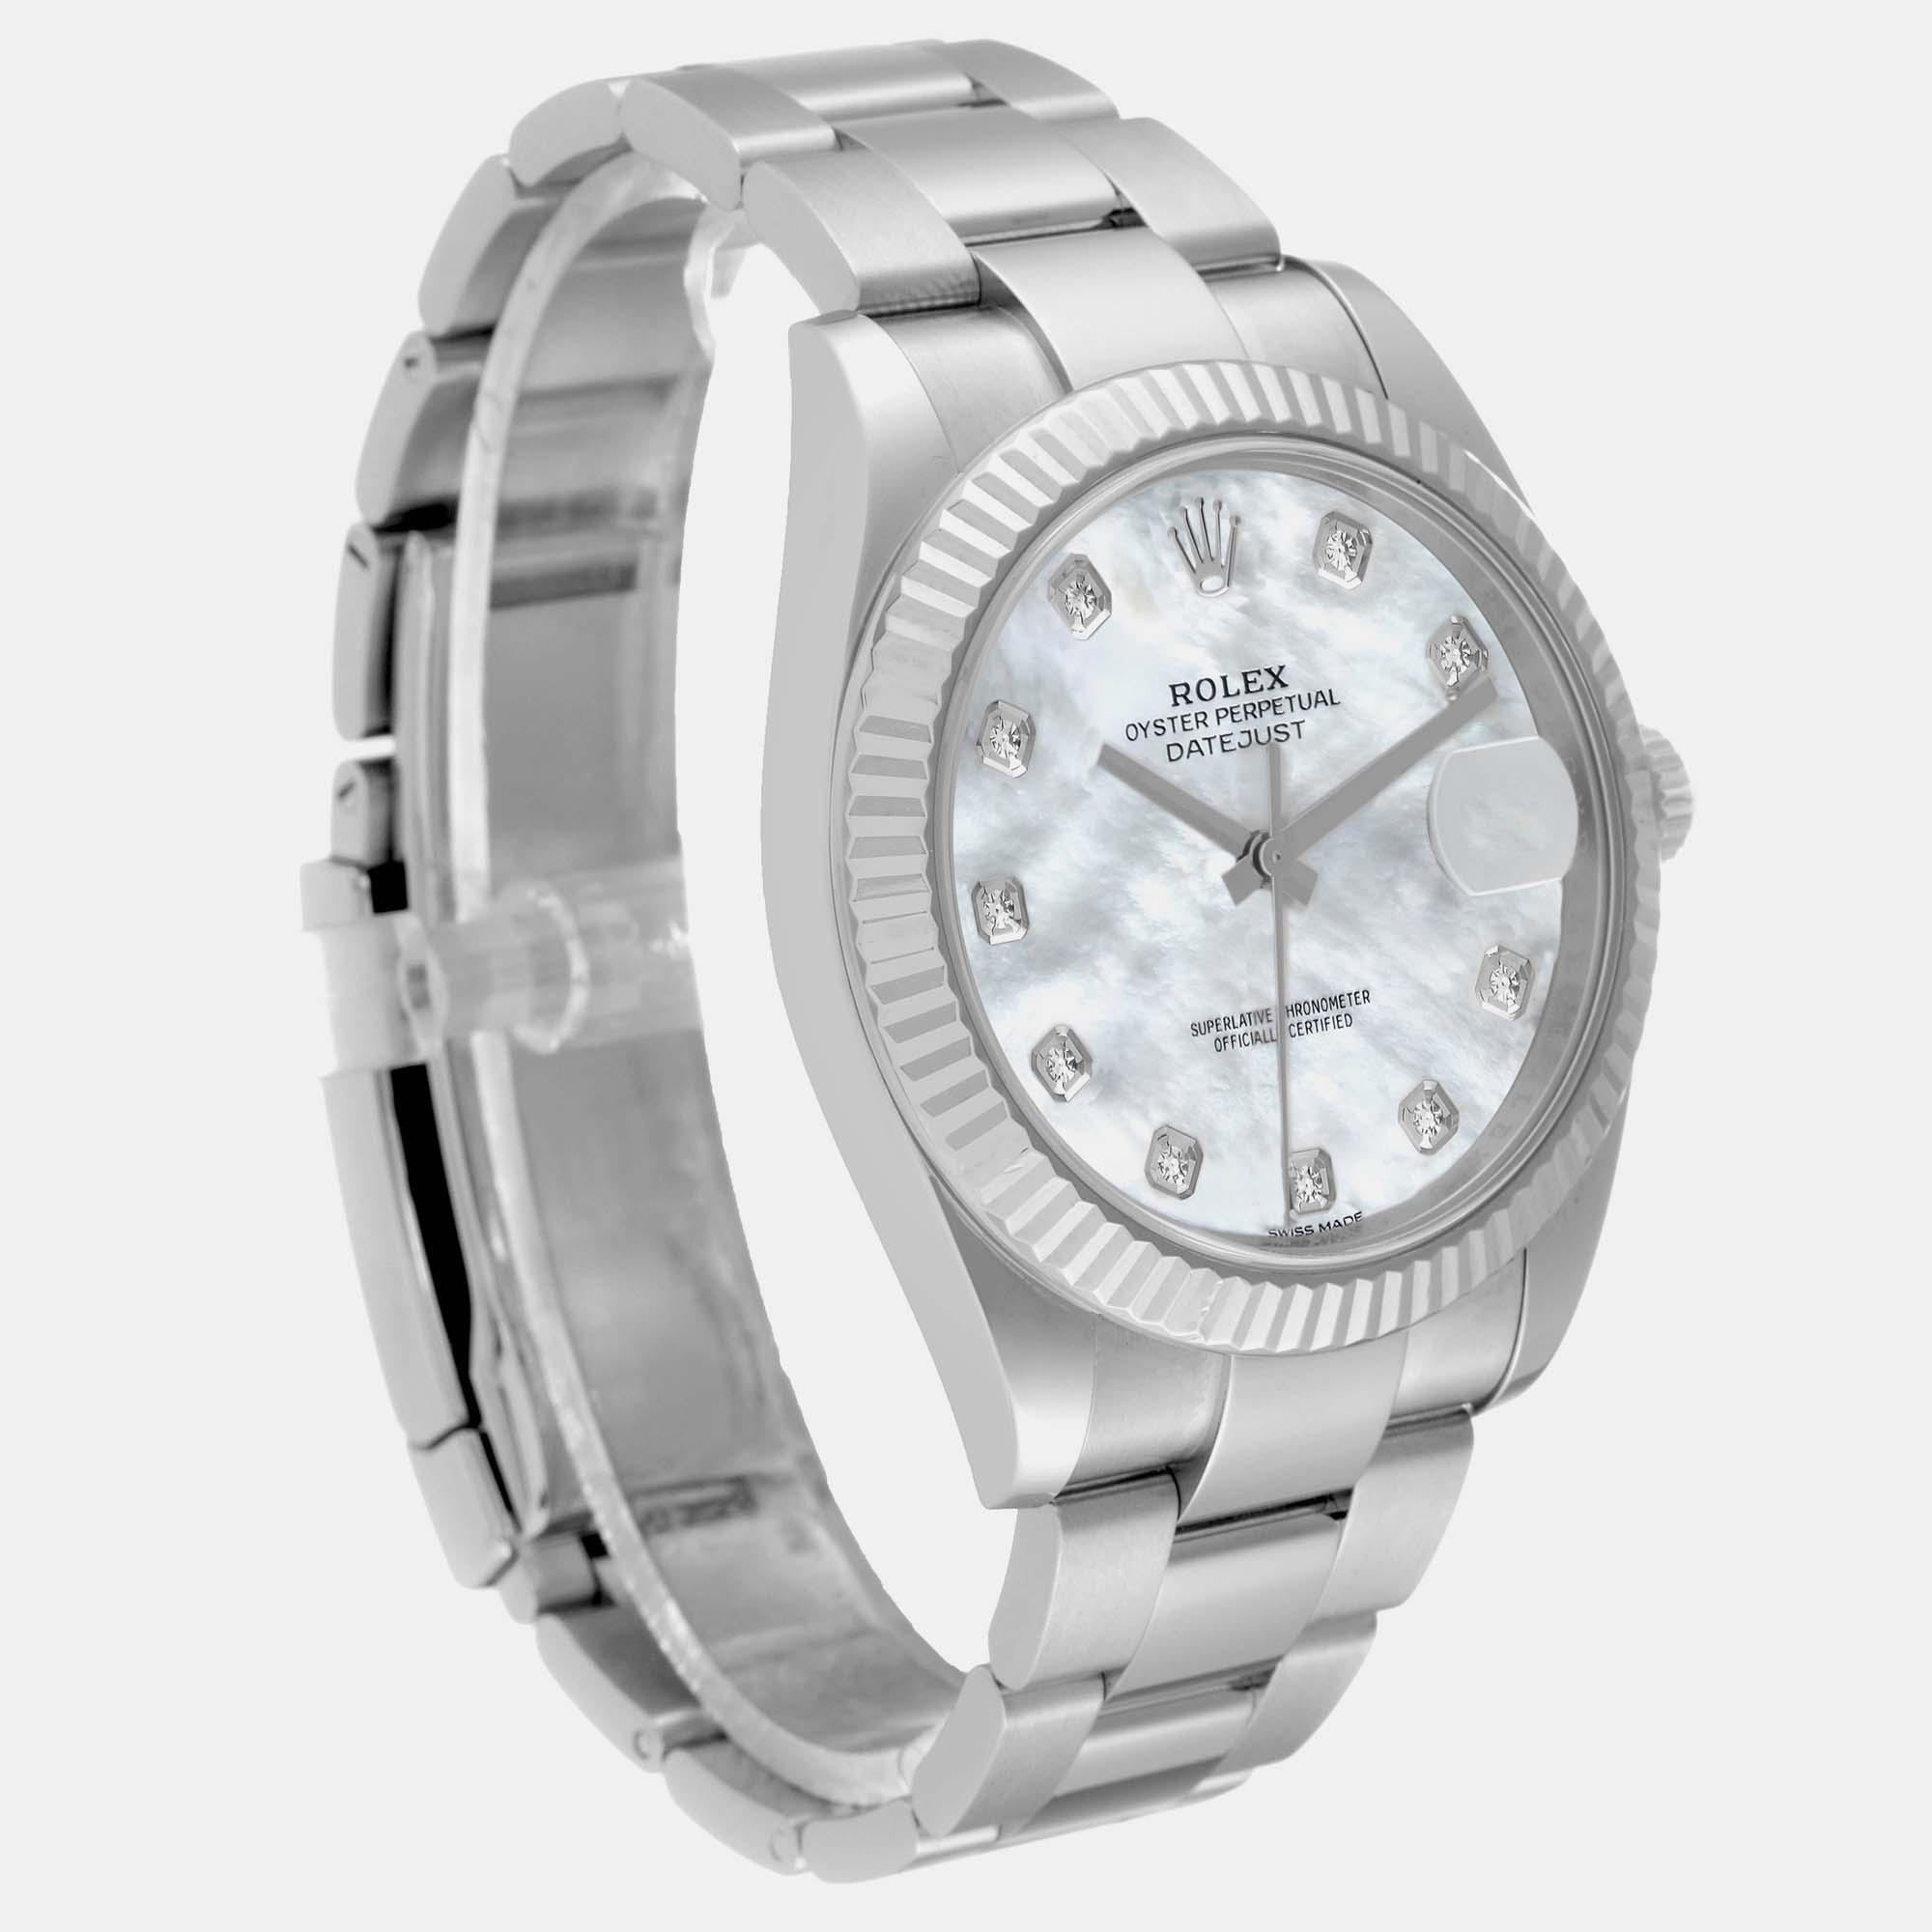 Rolex Datejust 41 Steel White Gold Mother Of Pearl Diamond Dial Mens Watch 126334